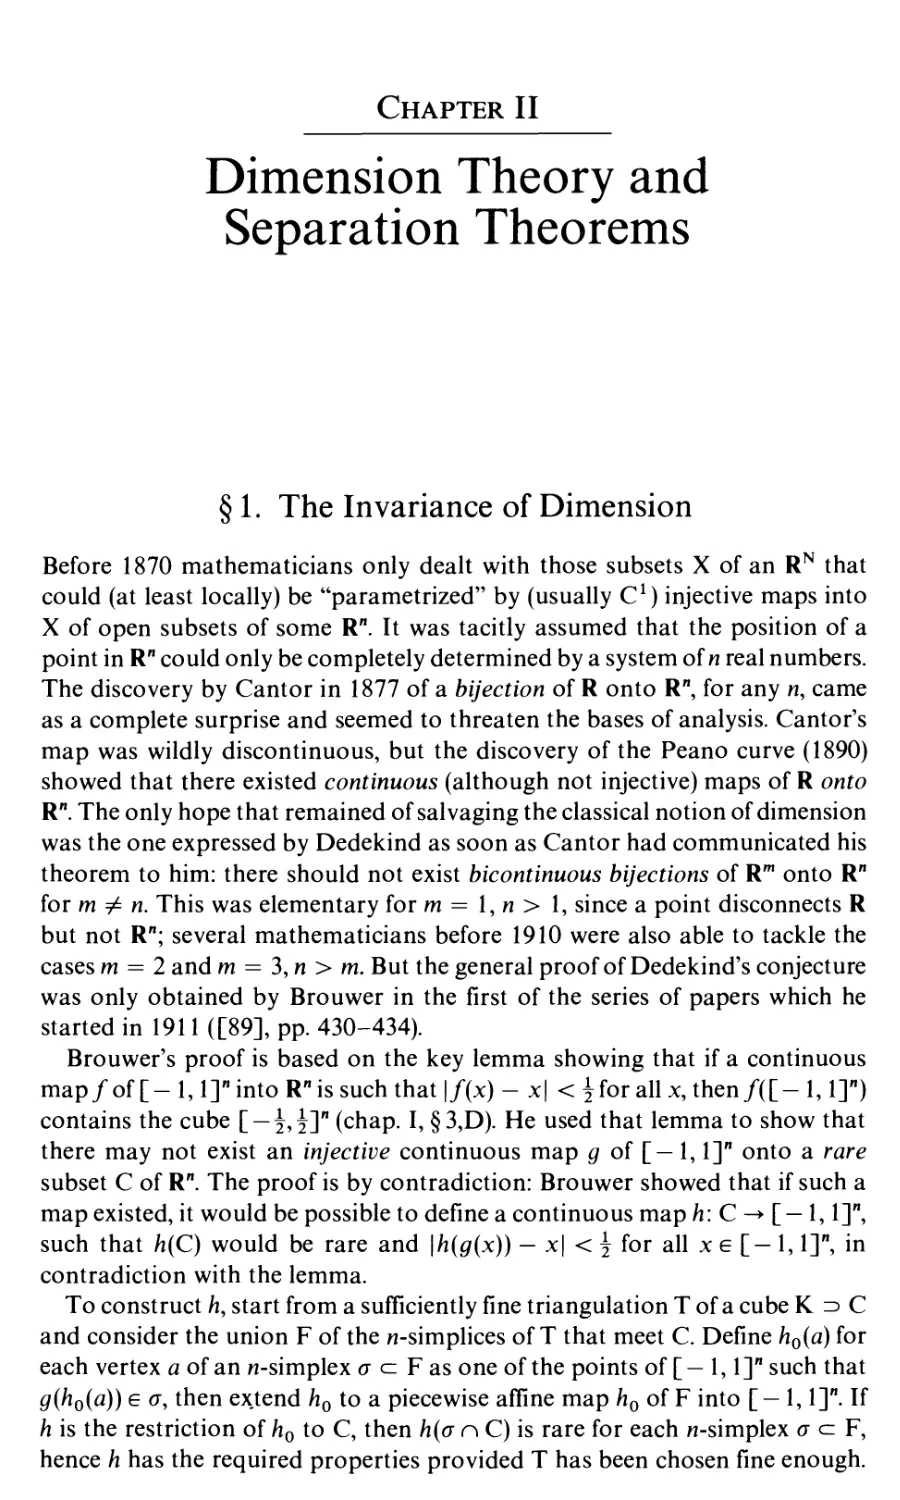 Chapter II. Dimension Theory and Separation Theorems